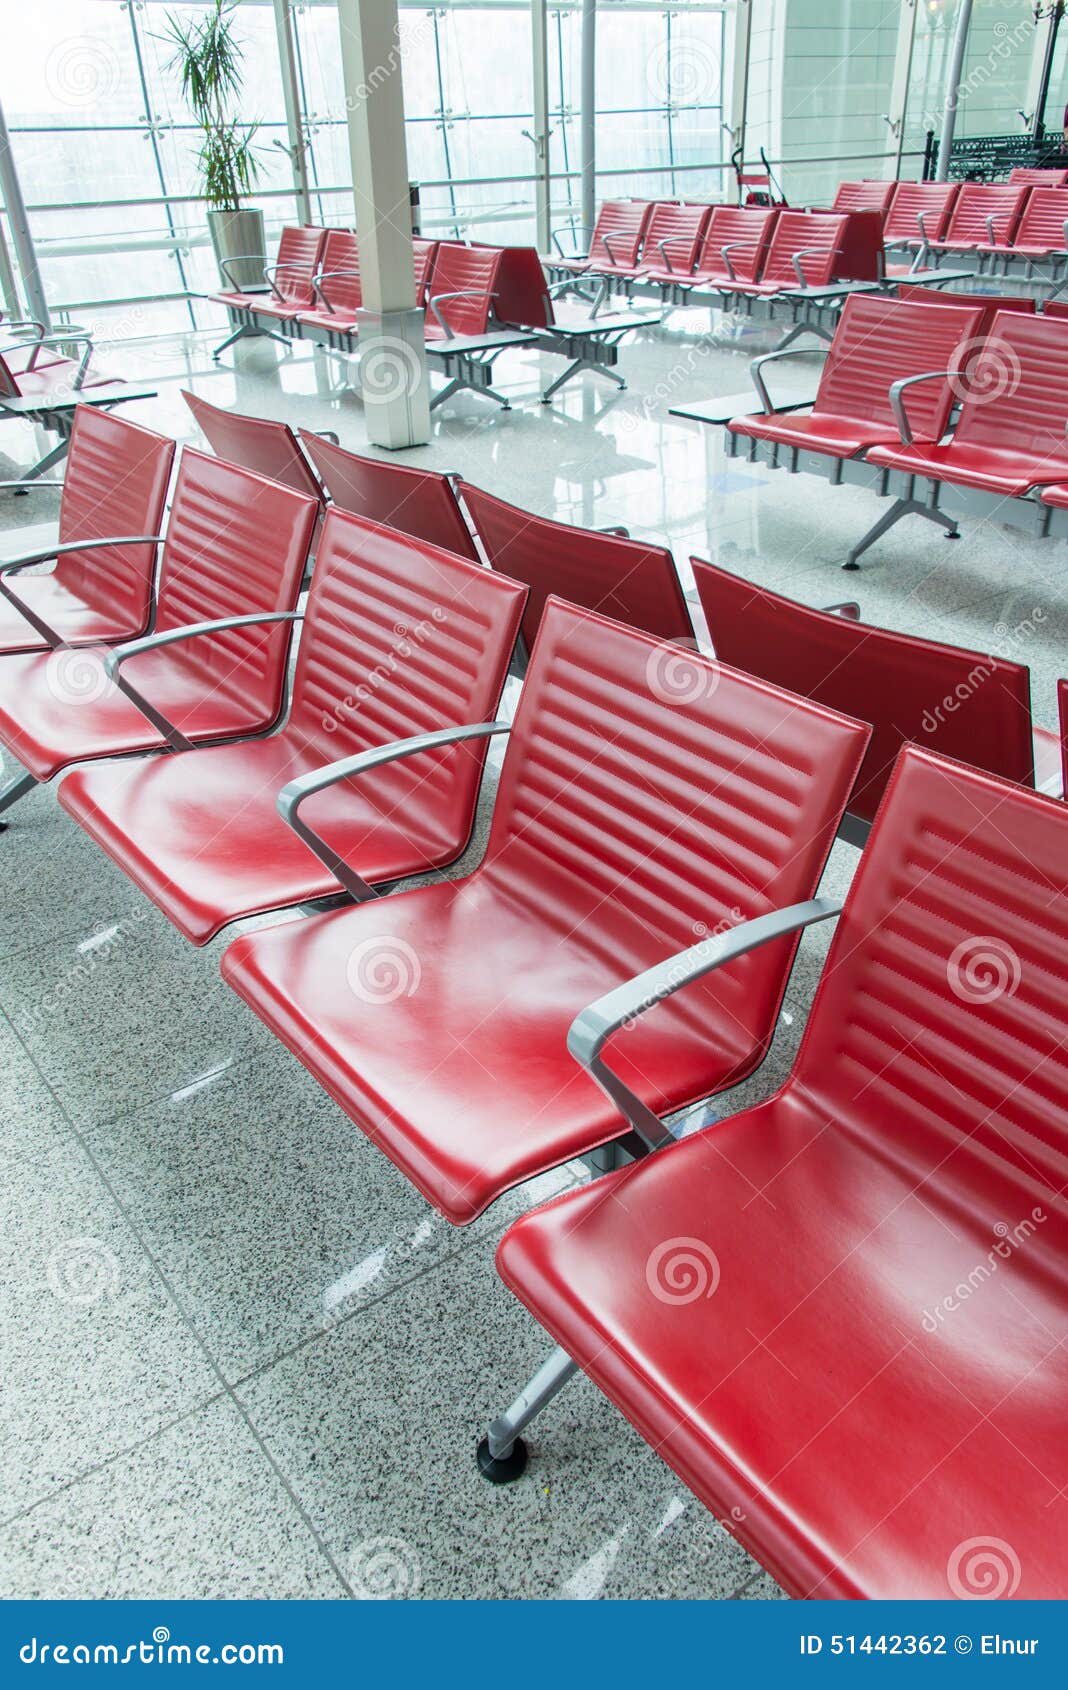 Airport seating chairs